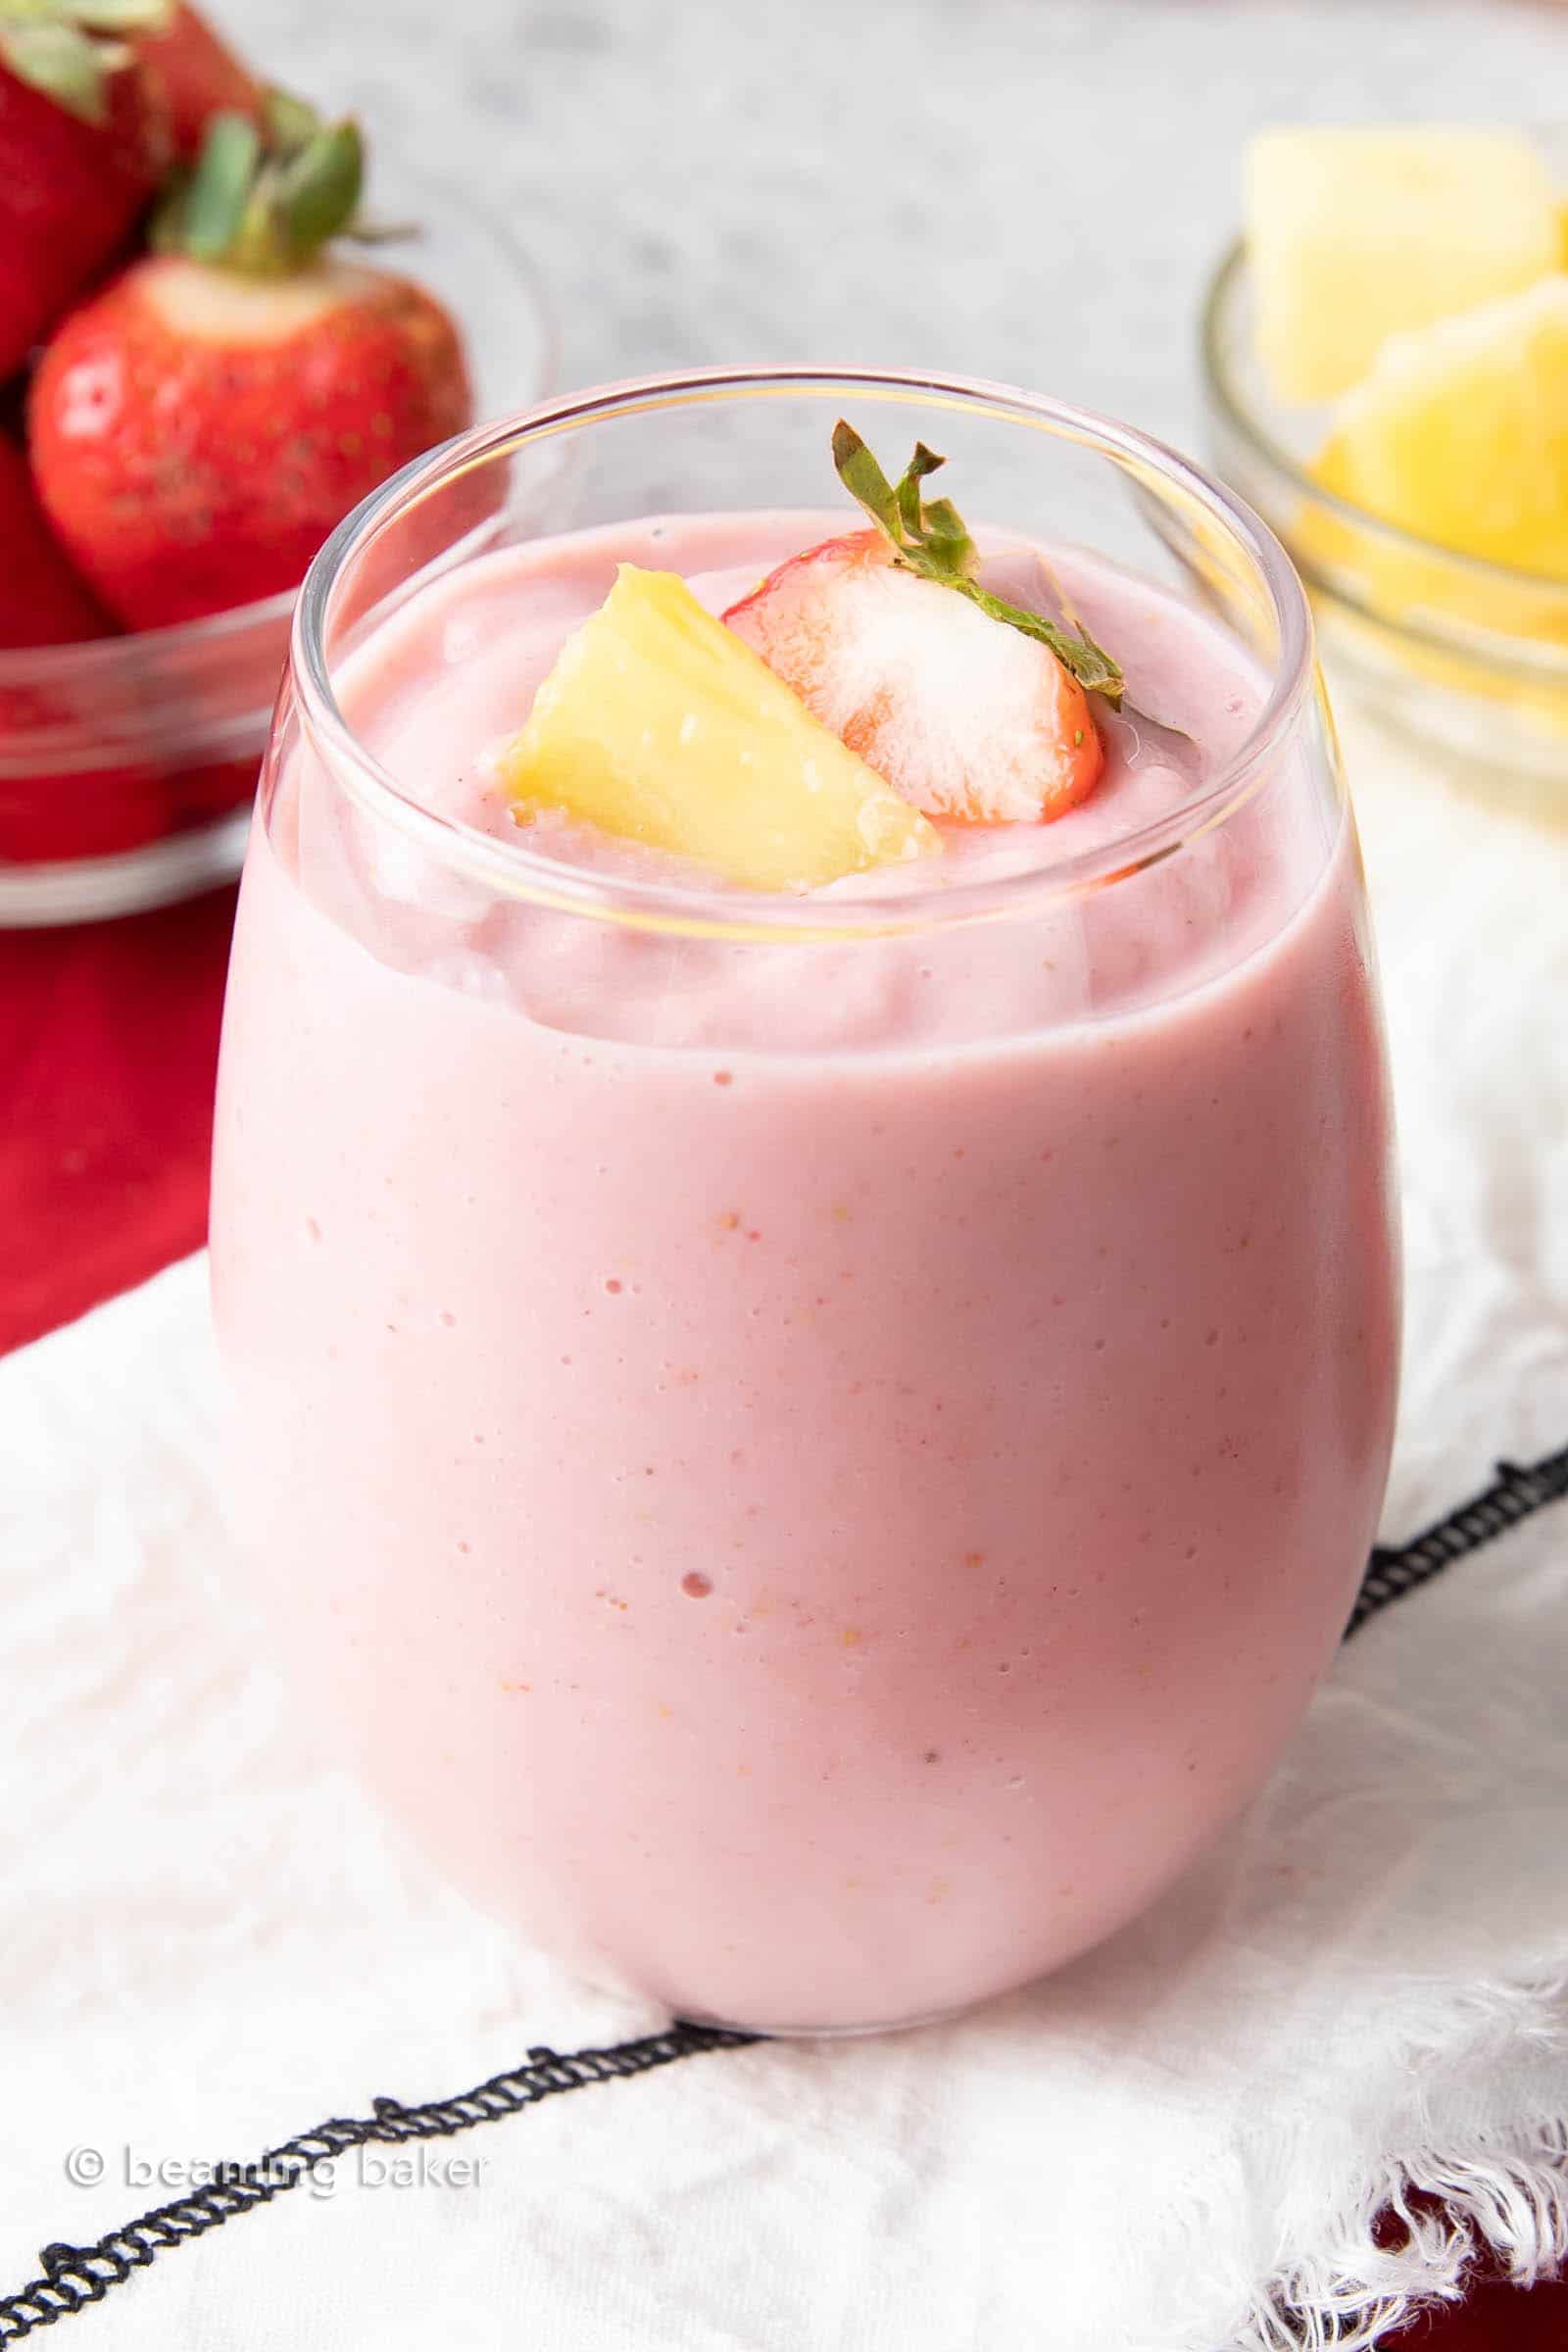 3 Ingredient Strawberry Pineapple Smoothie – a refreshingly simple strawberry pineapple smoothie made with just 3 ingredients! Frosty ‘n thick with refreshing fruity flavor. #Strawberry #Pineapple #Smoothie | Recipe at BeamingBaker.com